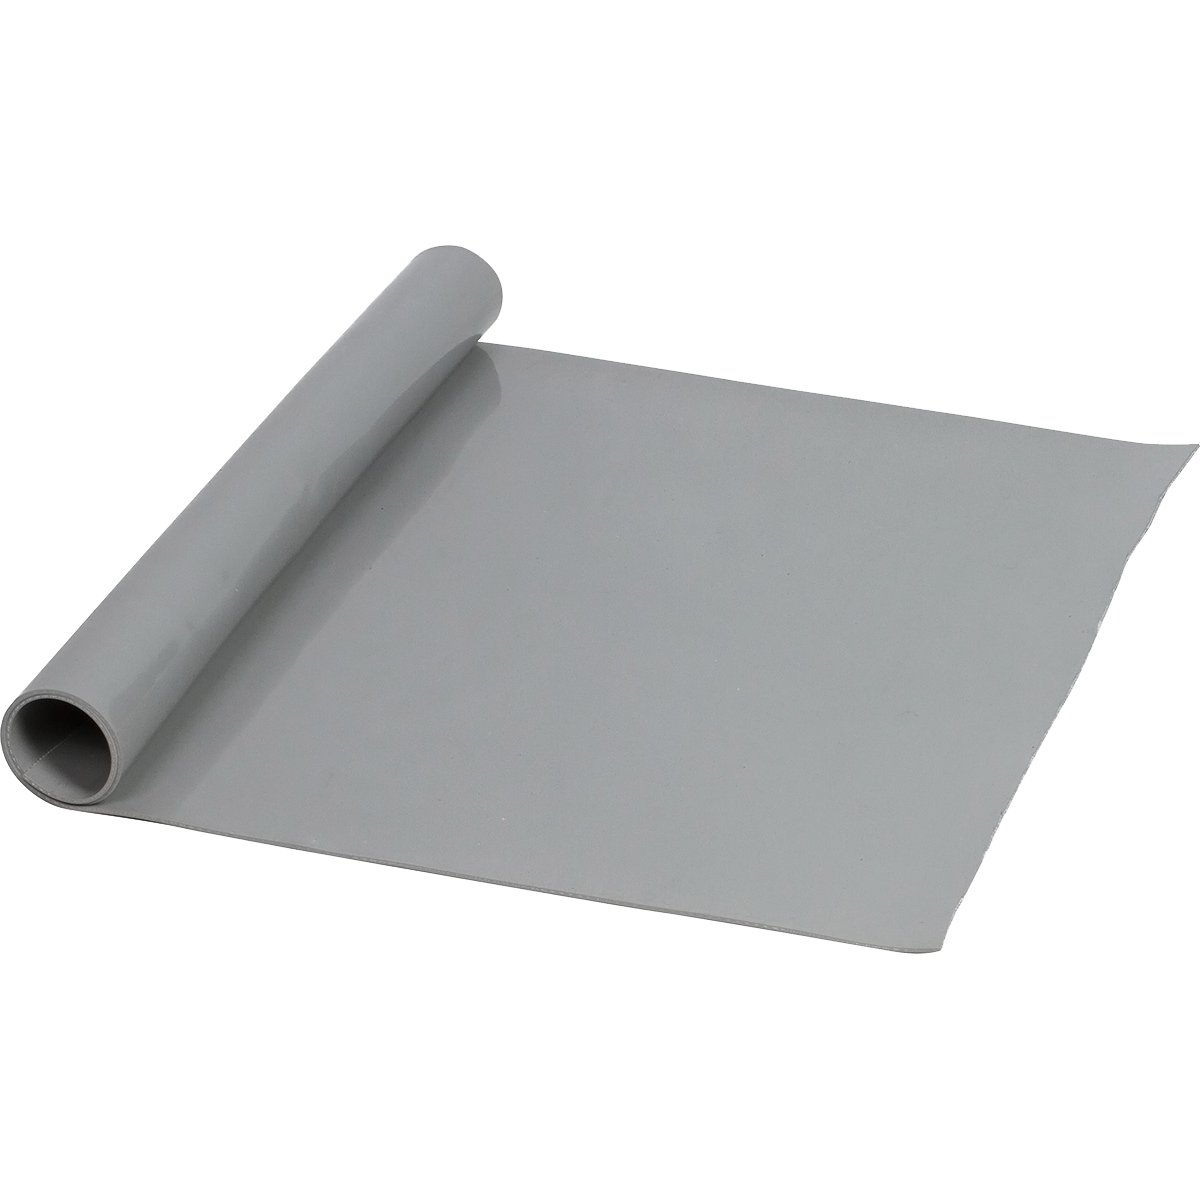 Grey+Black Color Silicone Sheet, Silicone Sheeting, Silicone Roll